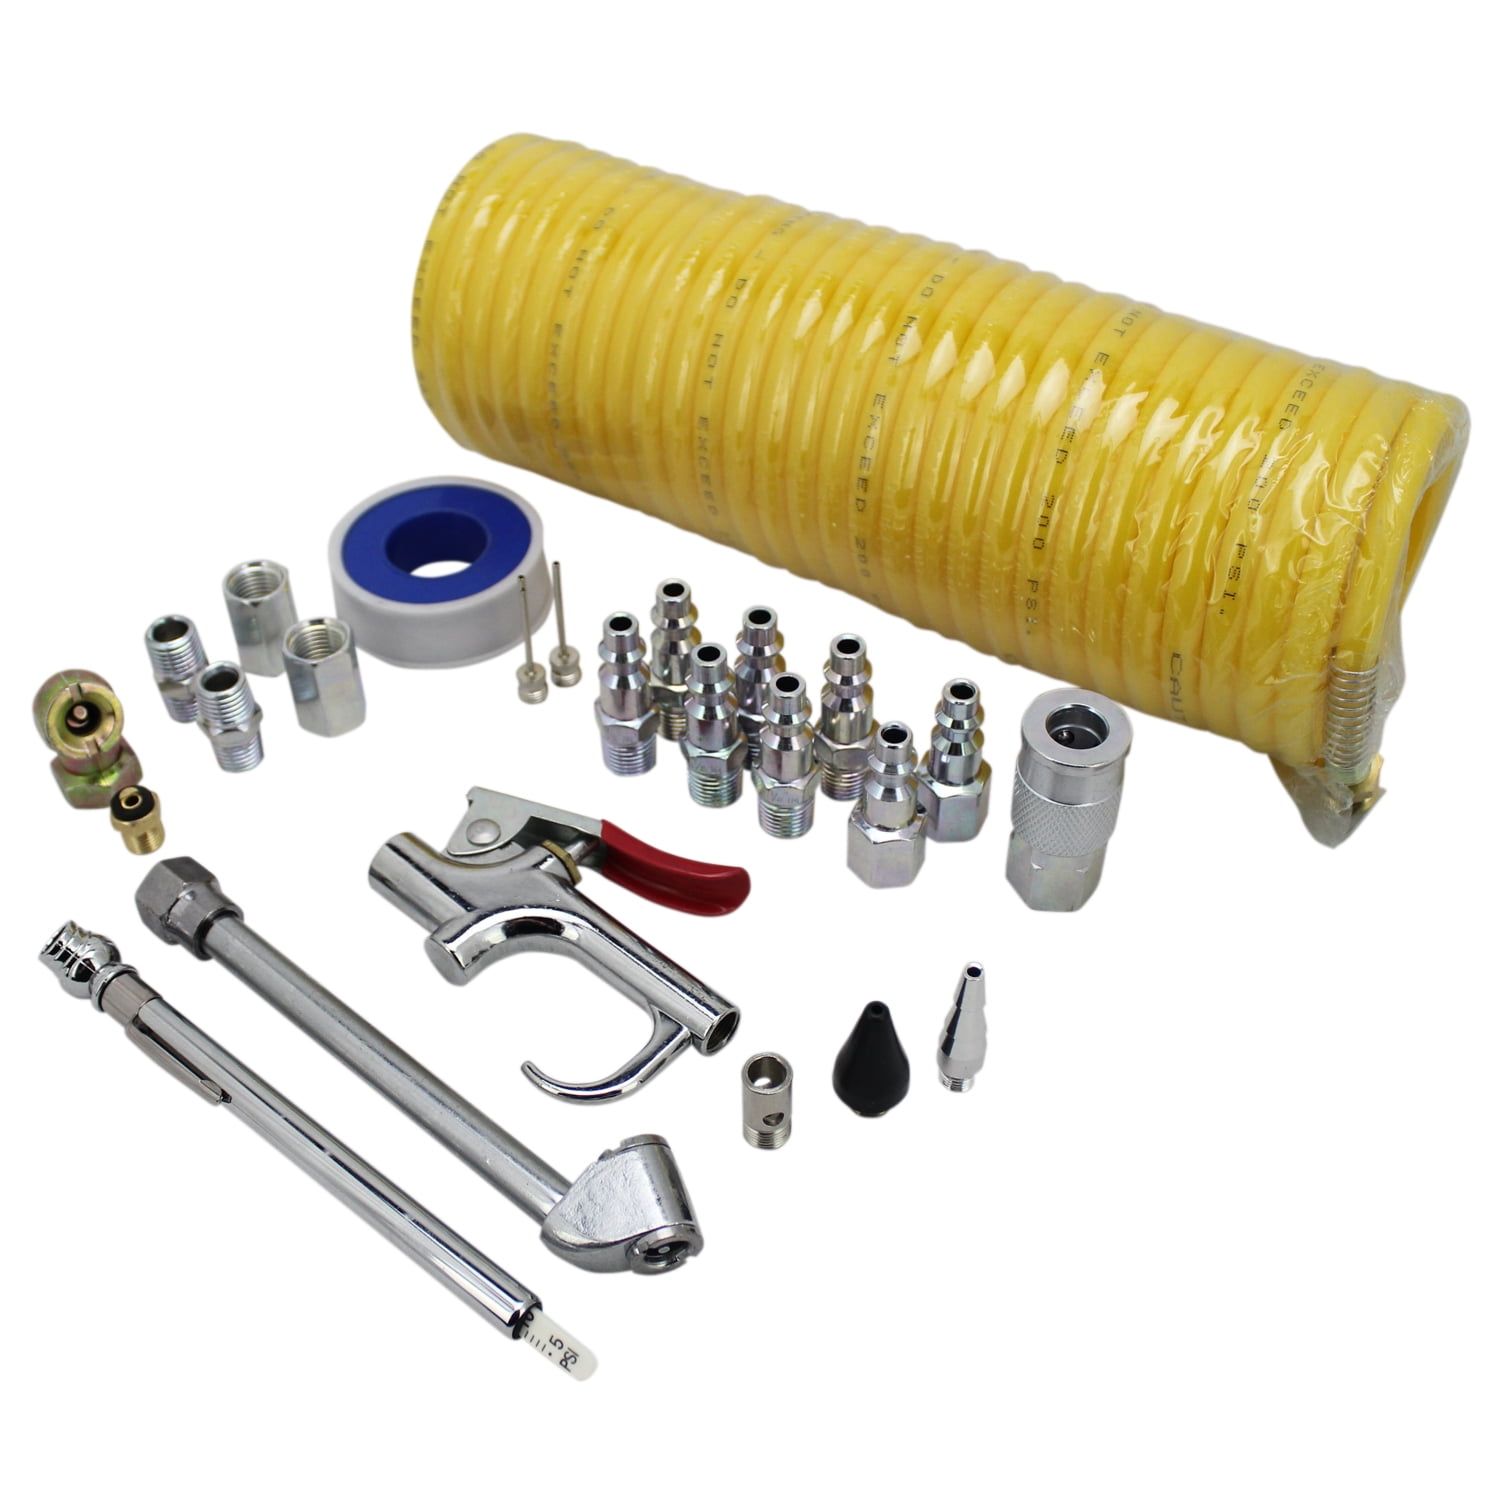 Air Hose Kit-7.5 Meters PVC Pneumatic Air Compressor Hose Accessory Kit with American Quick Connect